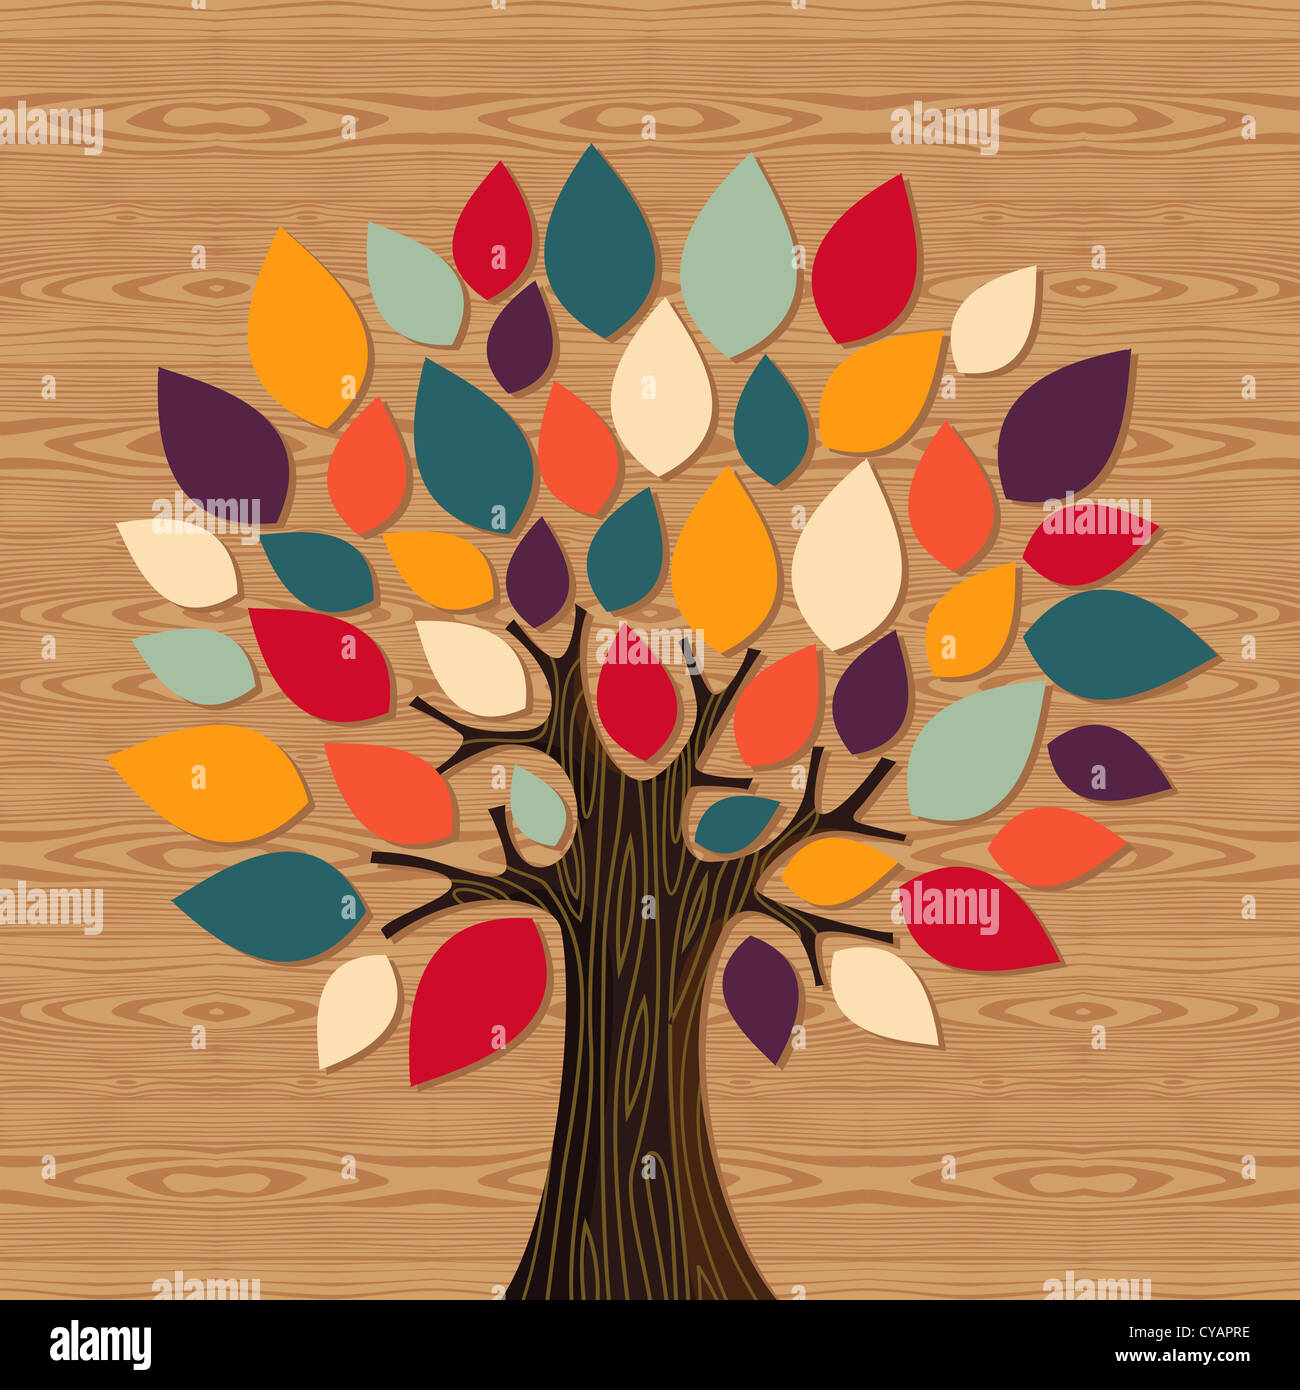 Diversity concept tree illustration. Vector file layered for easy manipulation and custom coloring. Stock Photo